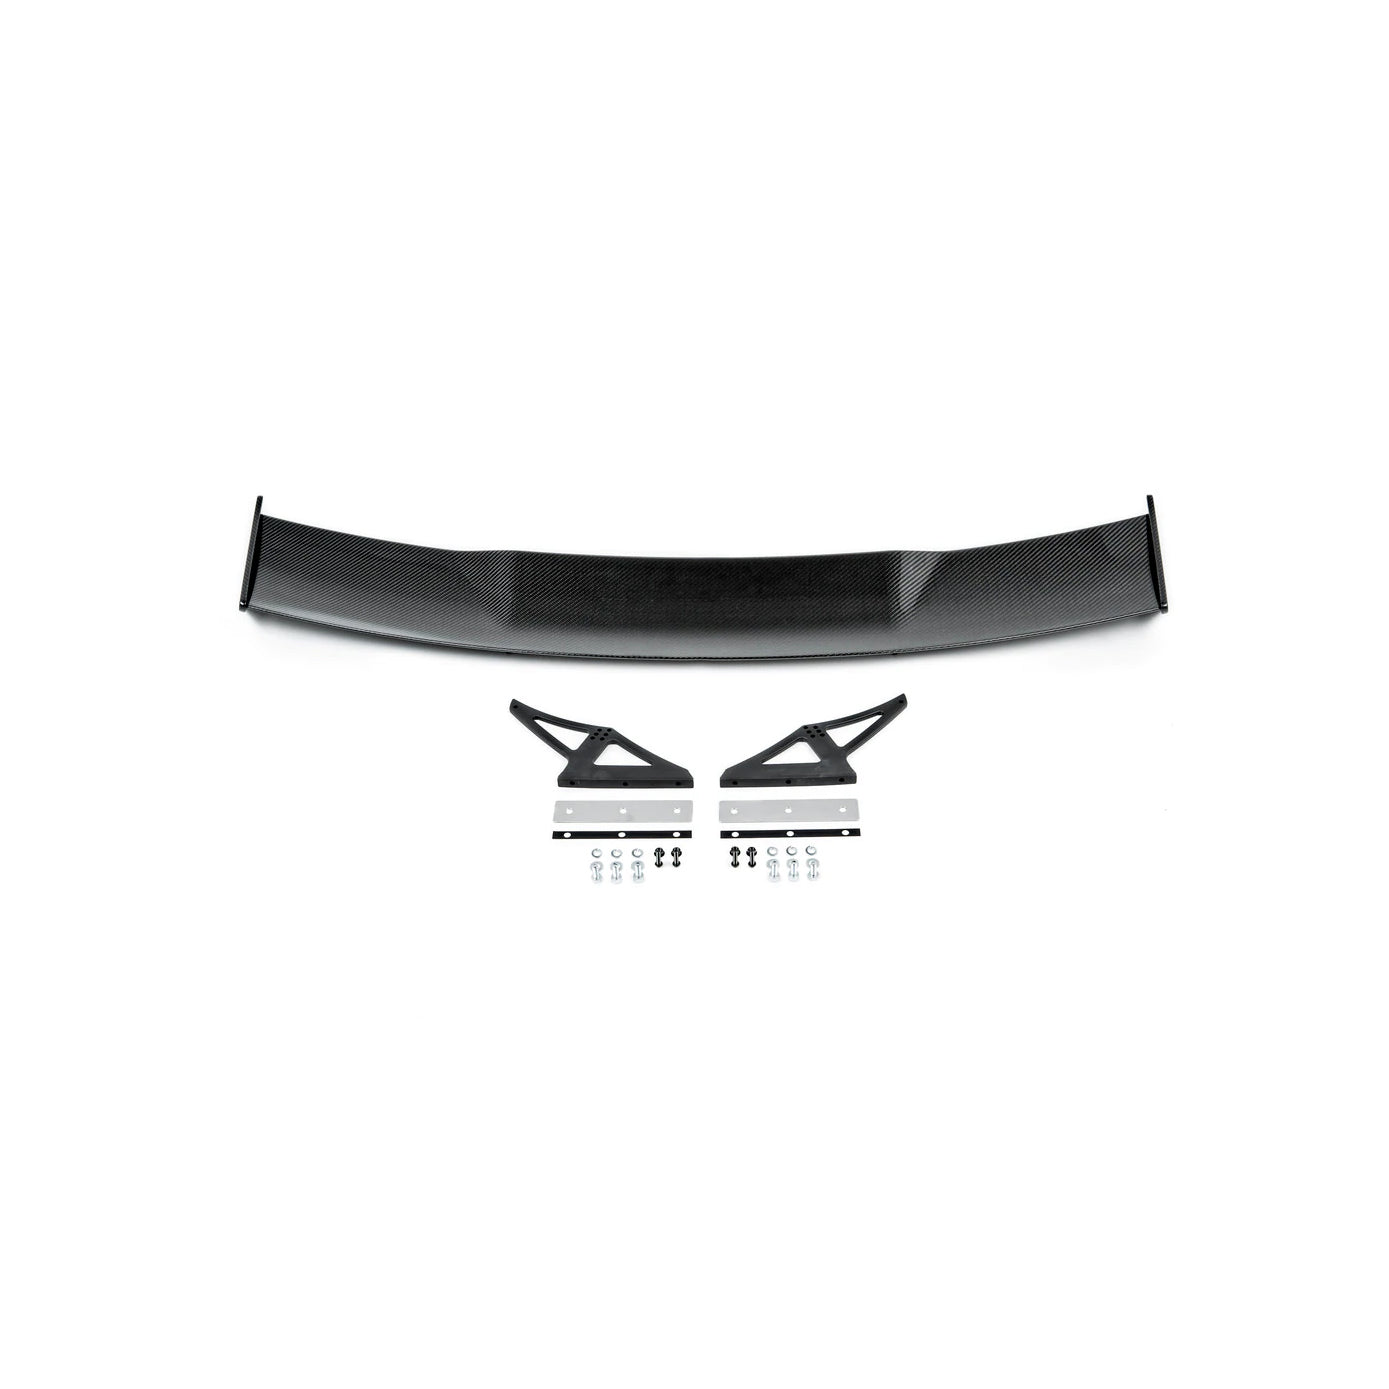 3D Design F80 M3 Dry Carbon Racing Wing